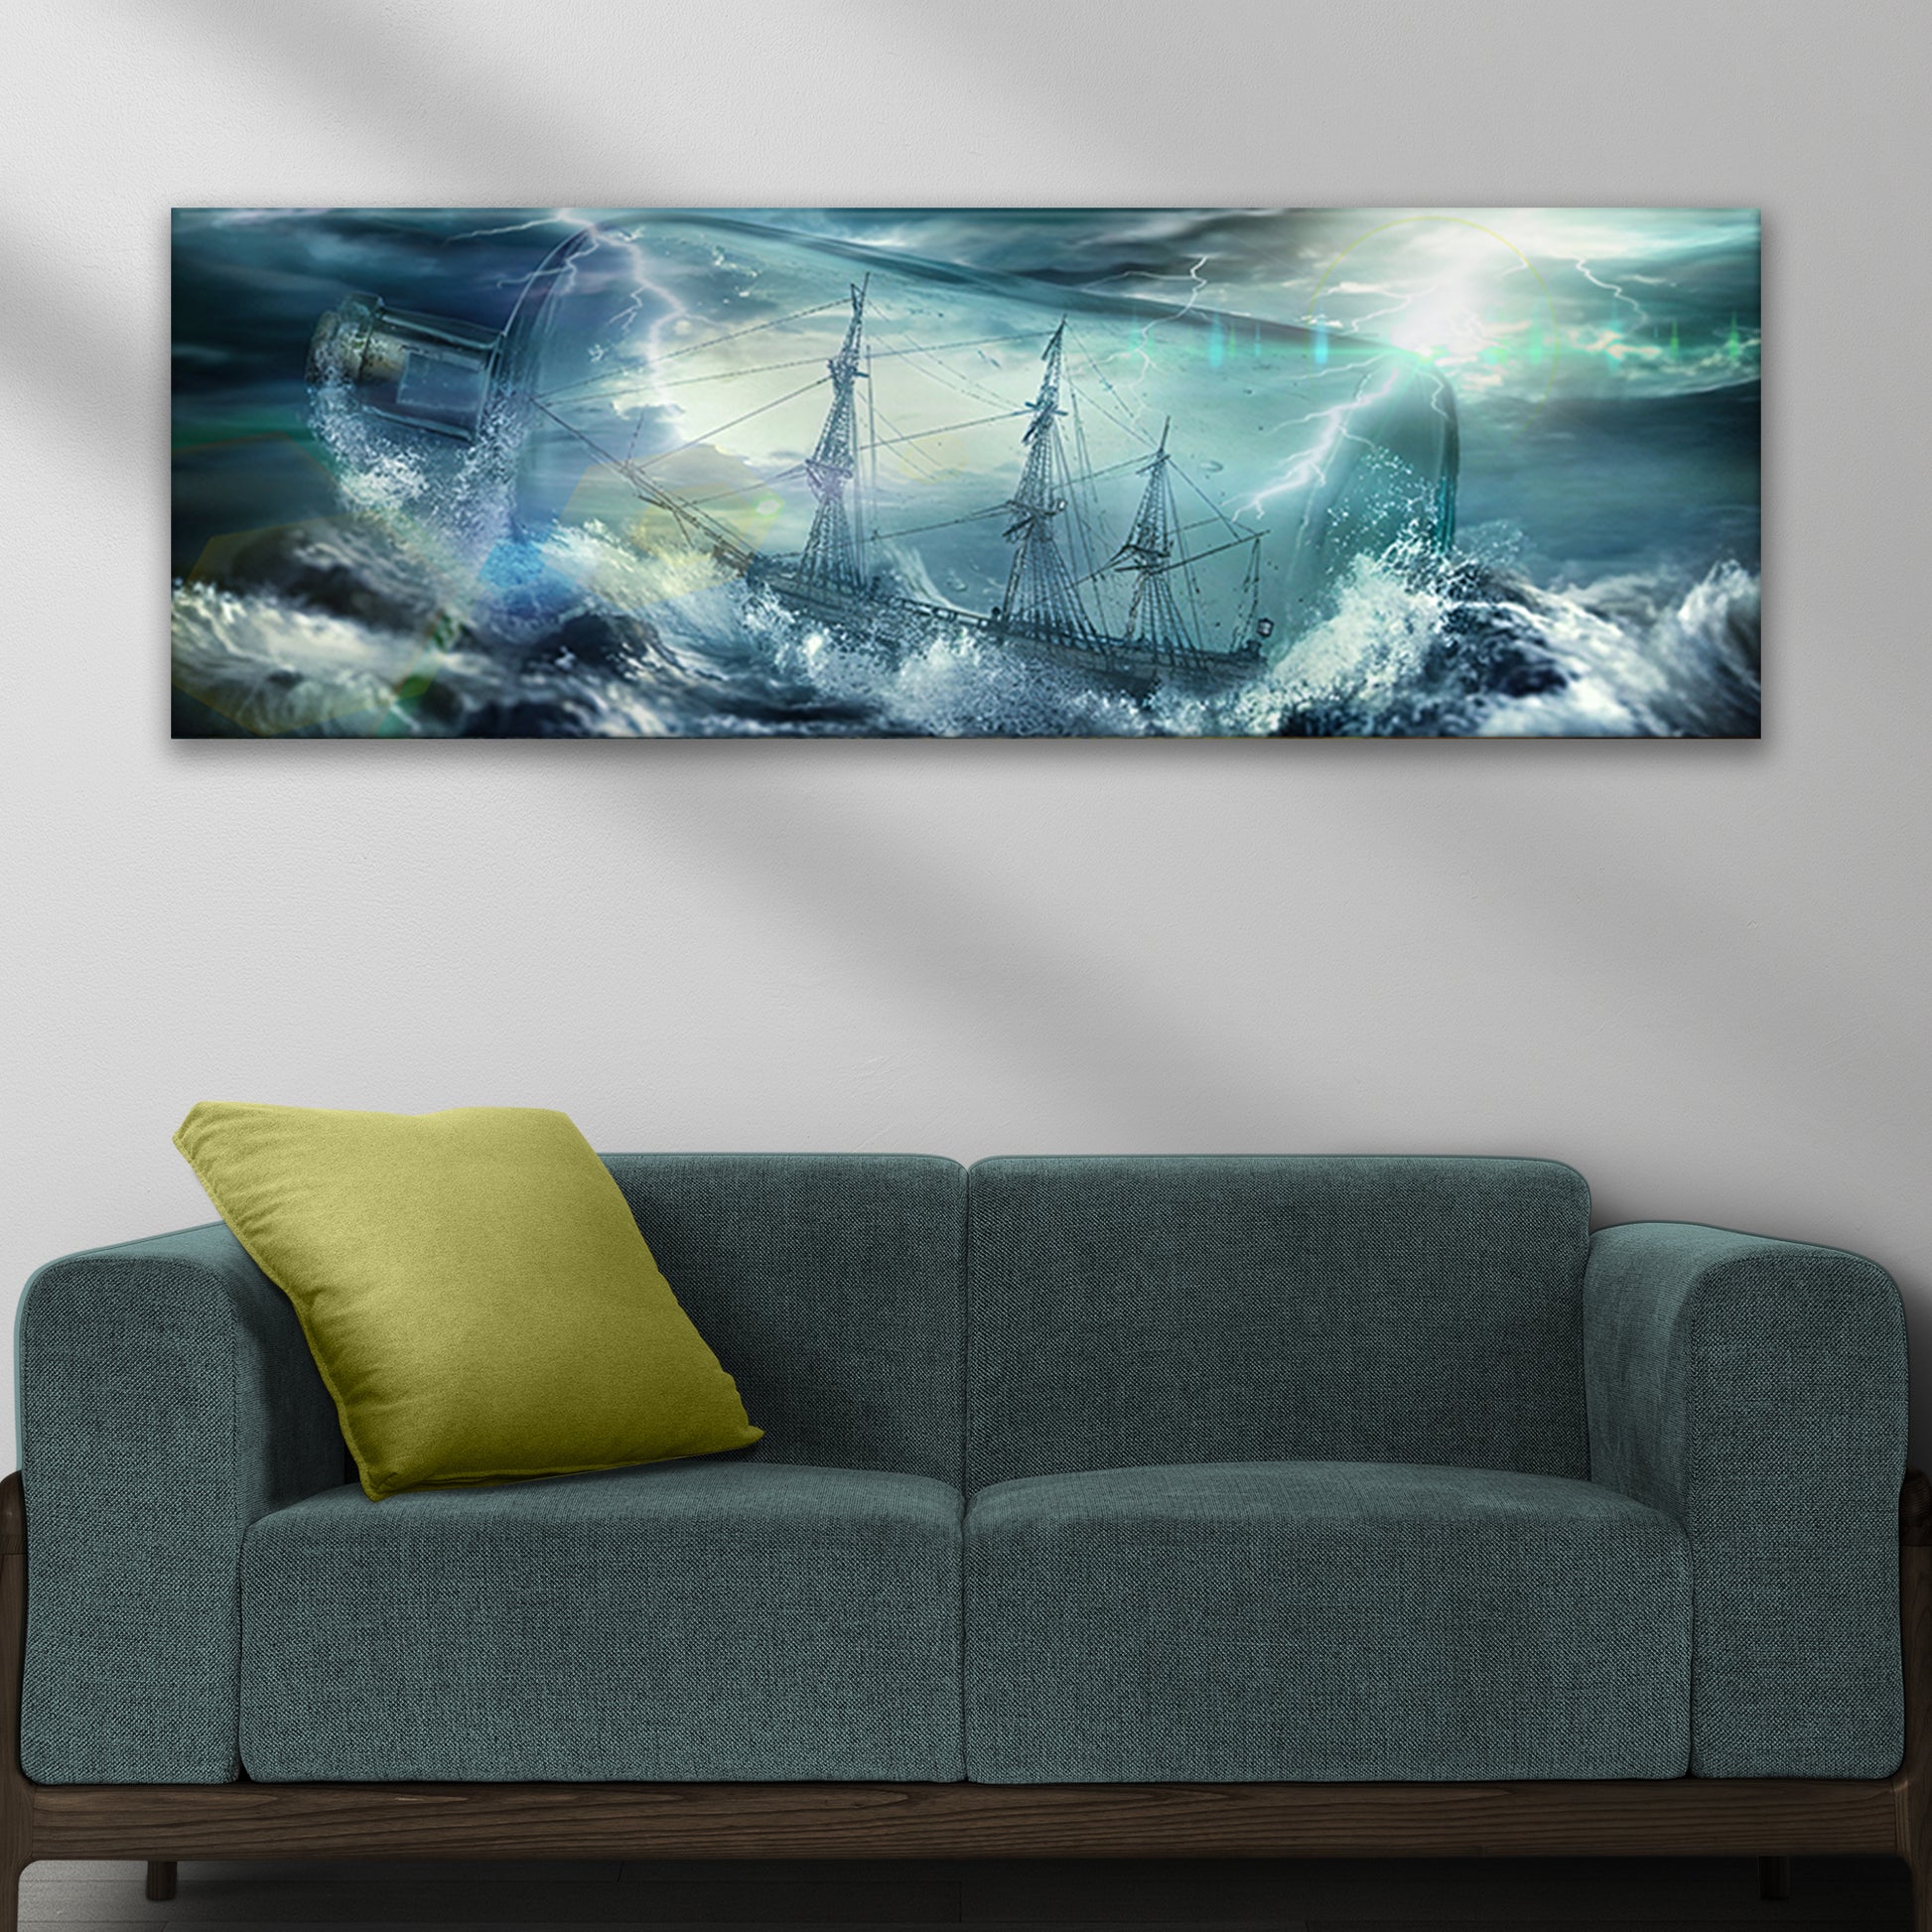 Pirate Ship In A Bottle Canvas Wall Art - Image by Tailored Canvases